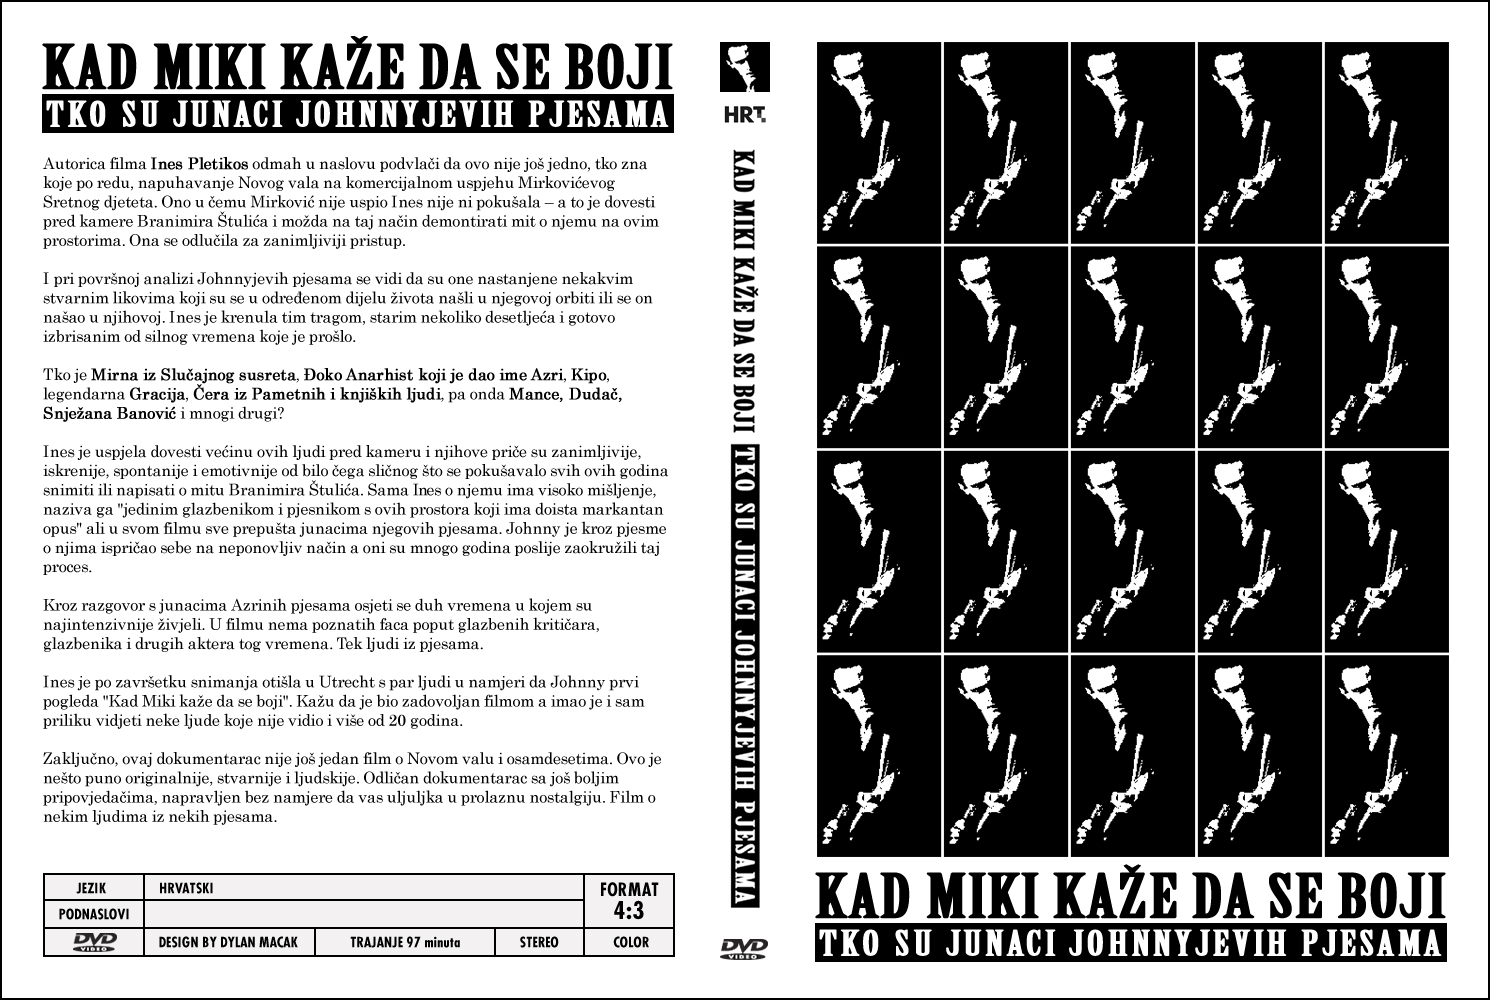 Click to view full size image -  DVD Cover - 0-9 - DVD - KAD MIKI KAZE DA SE BOJI - DVD - KAD MIKI KAZE DA SE BOJI.jpg